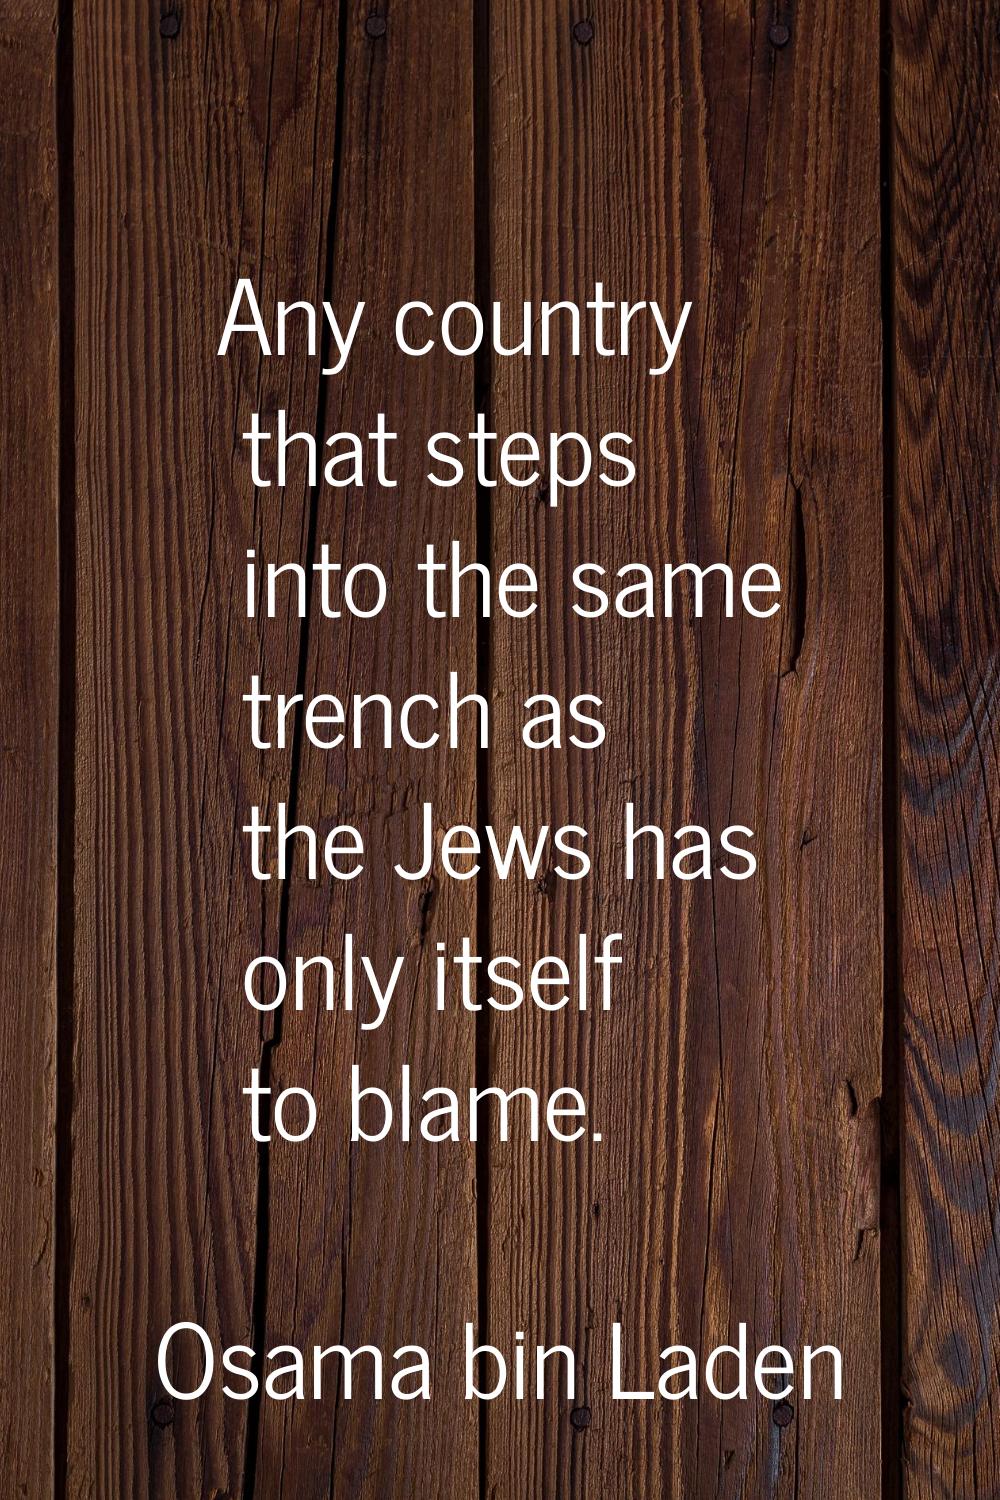 Any country that steps into the same trench as the Jews has only itself to blame.